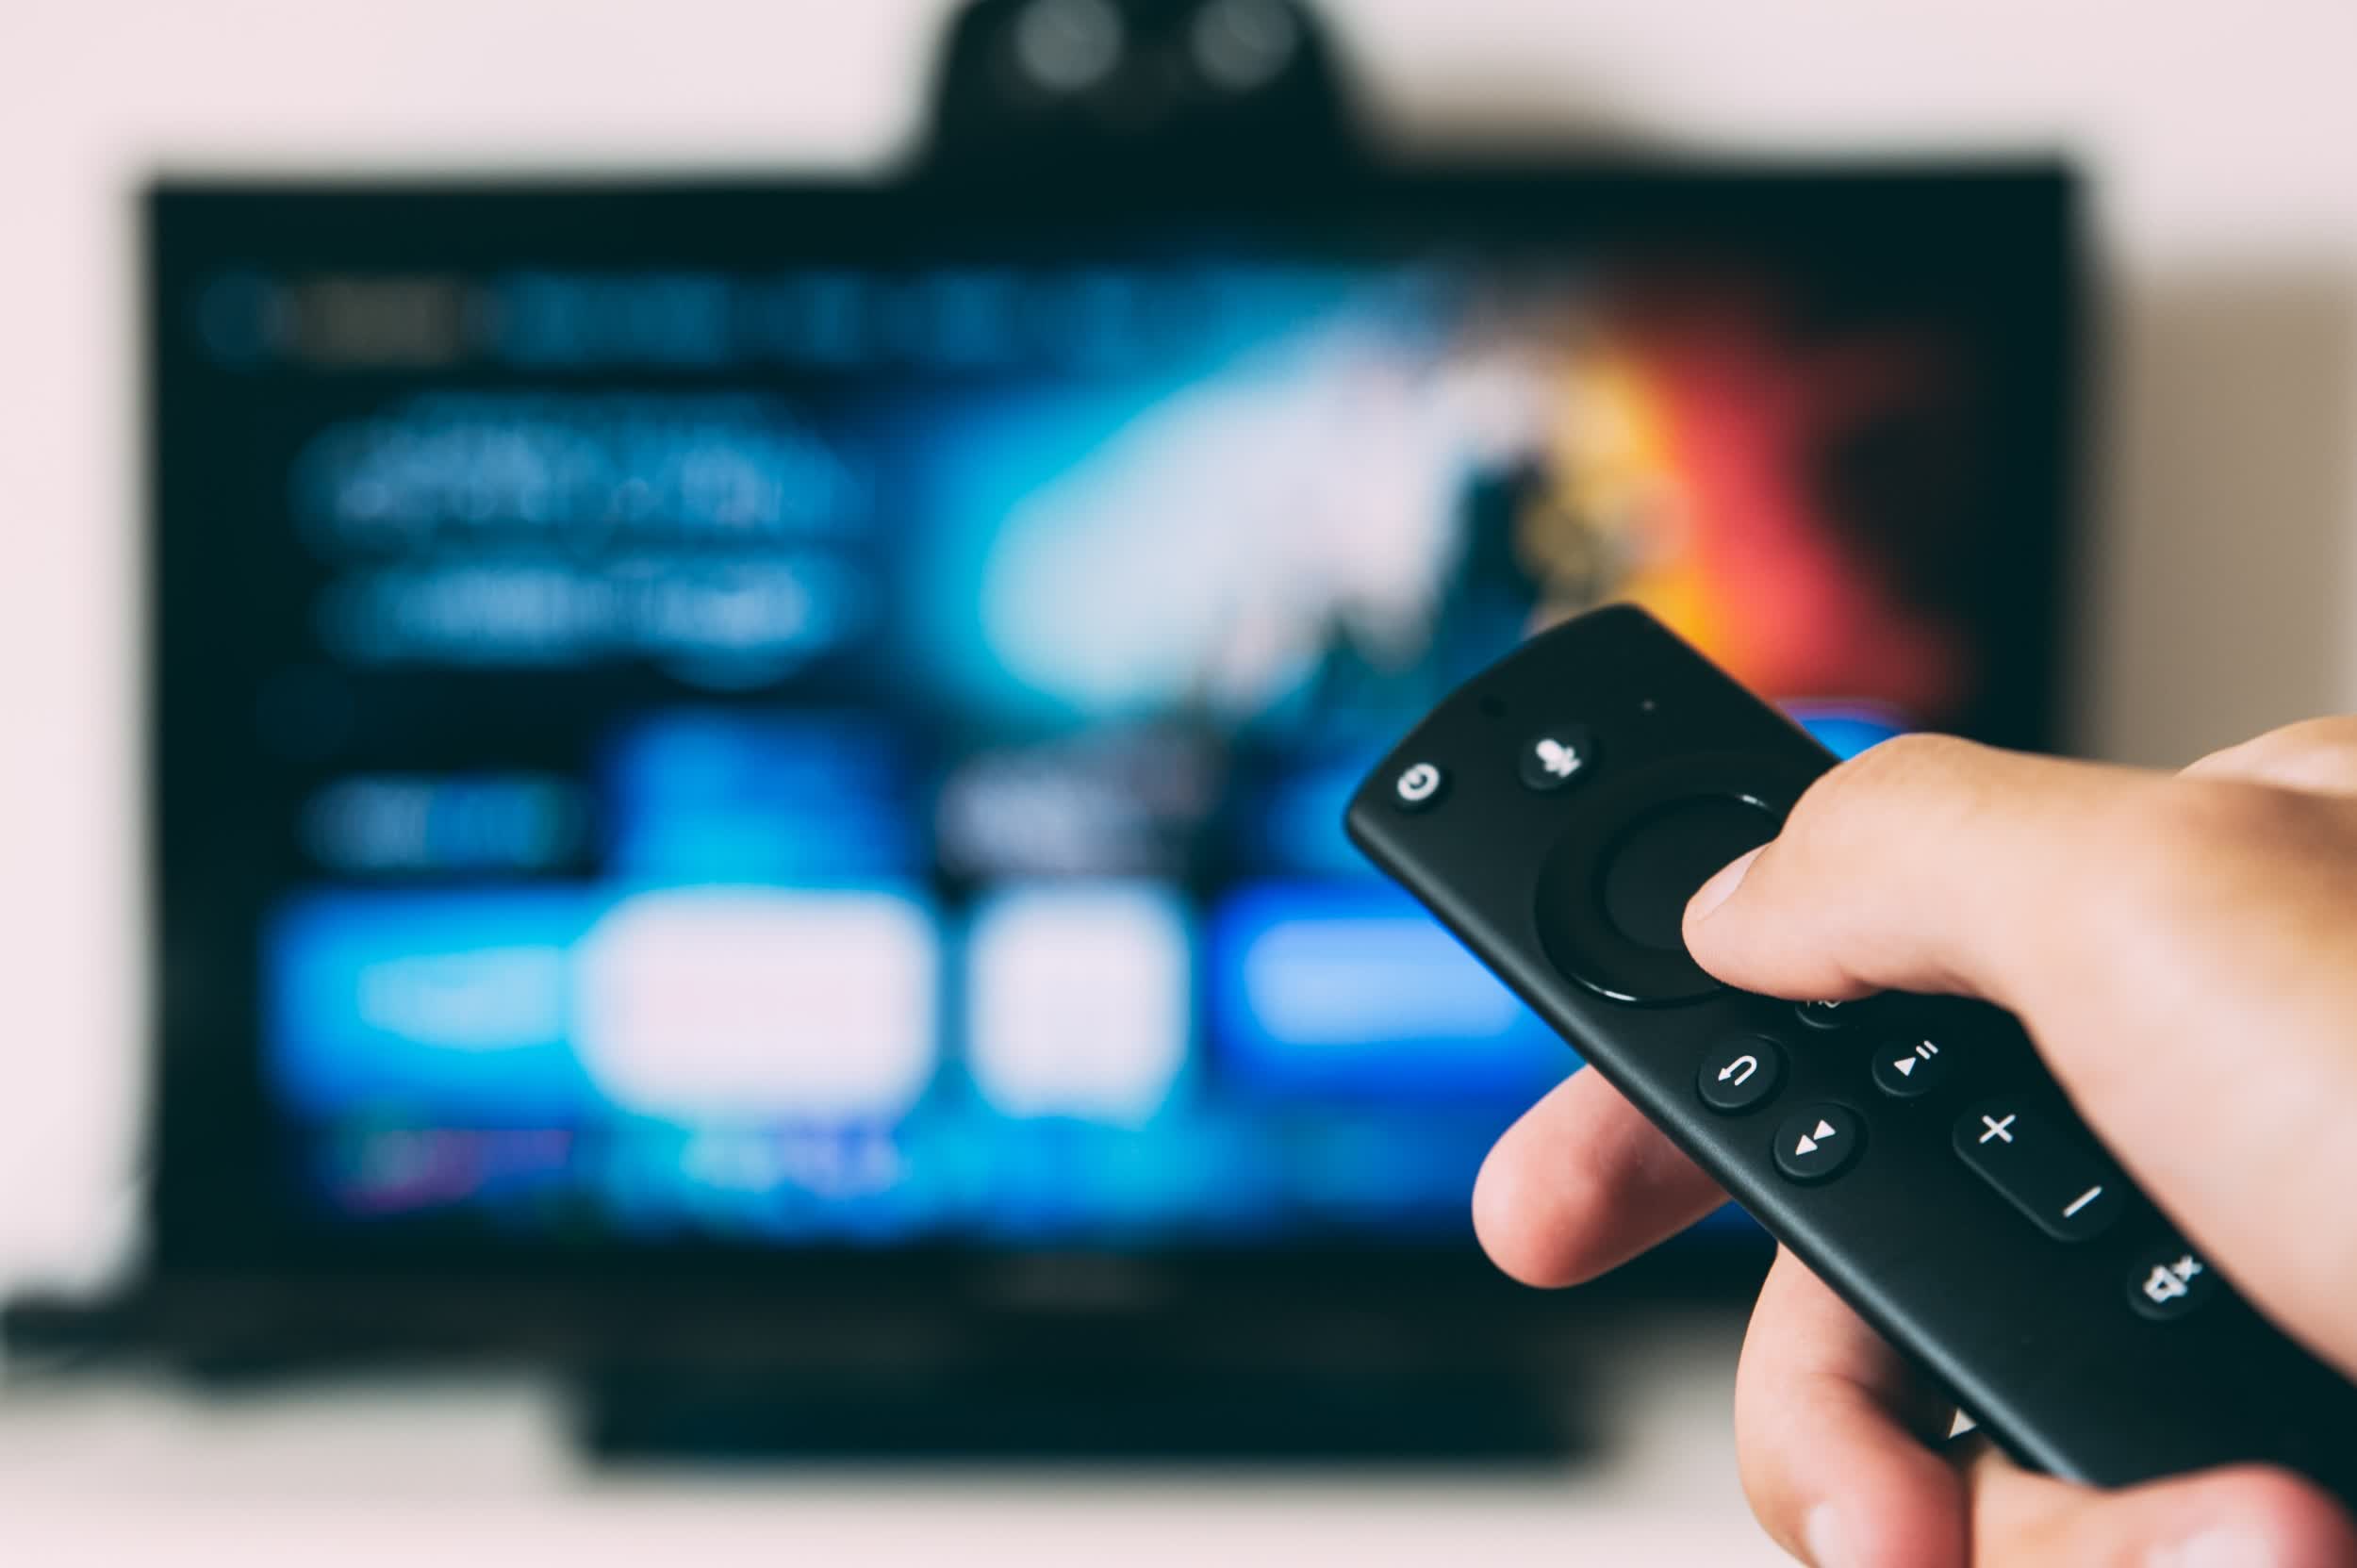 Streaming media player power consumption compared